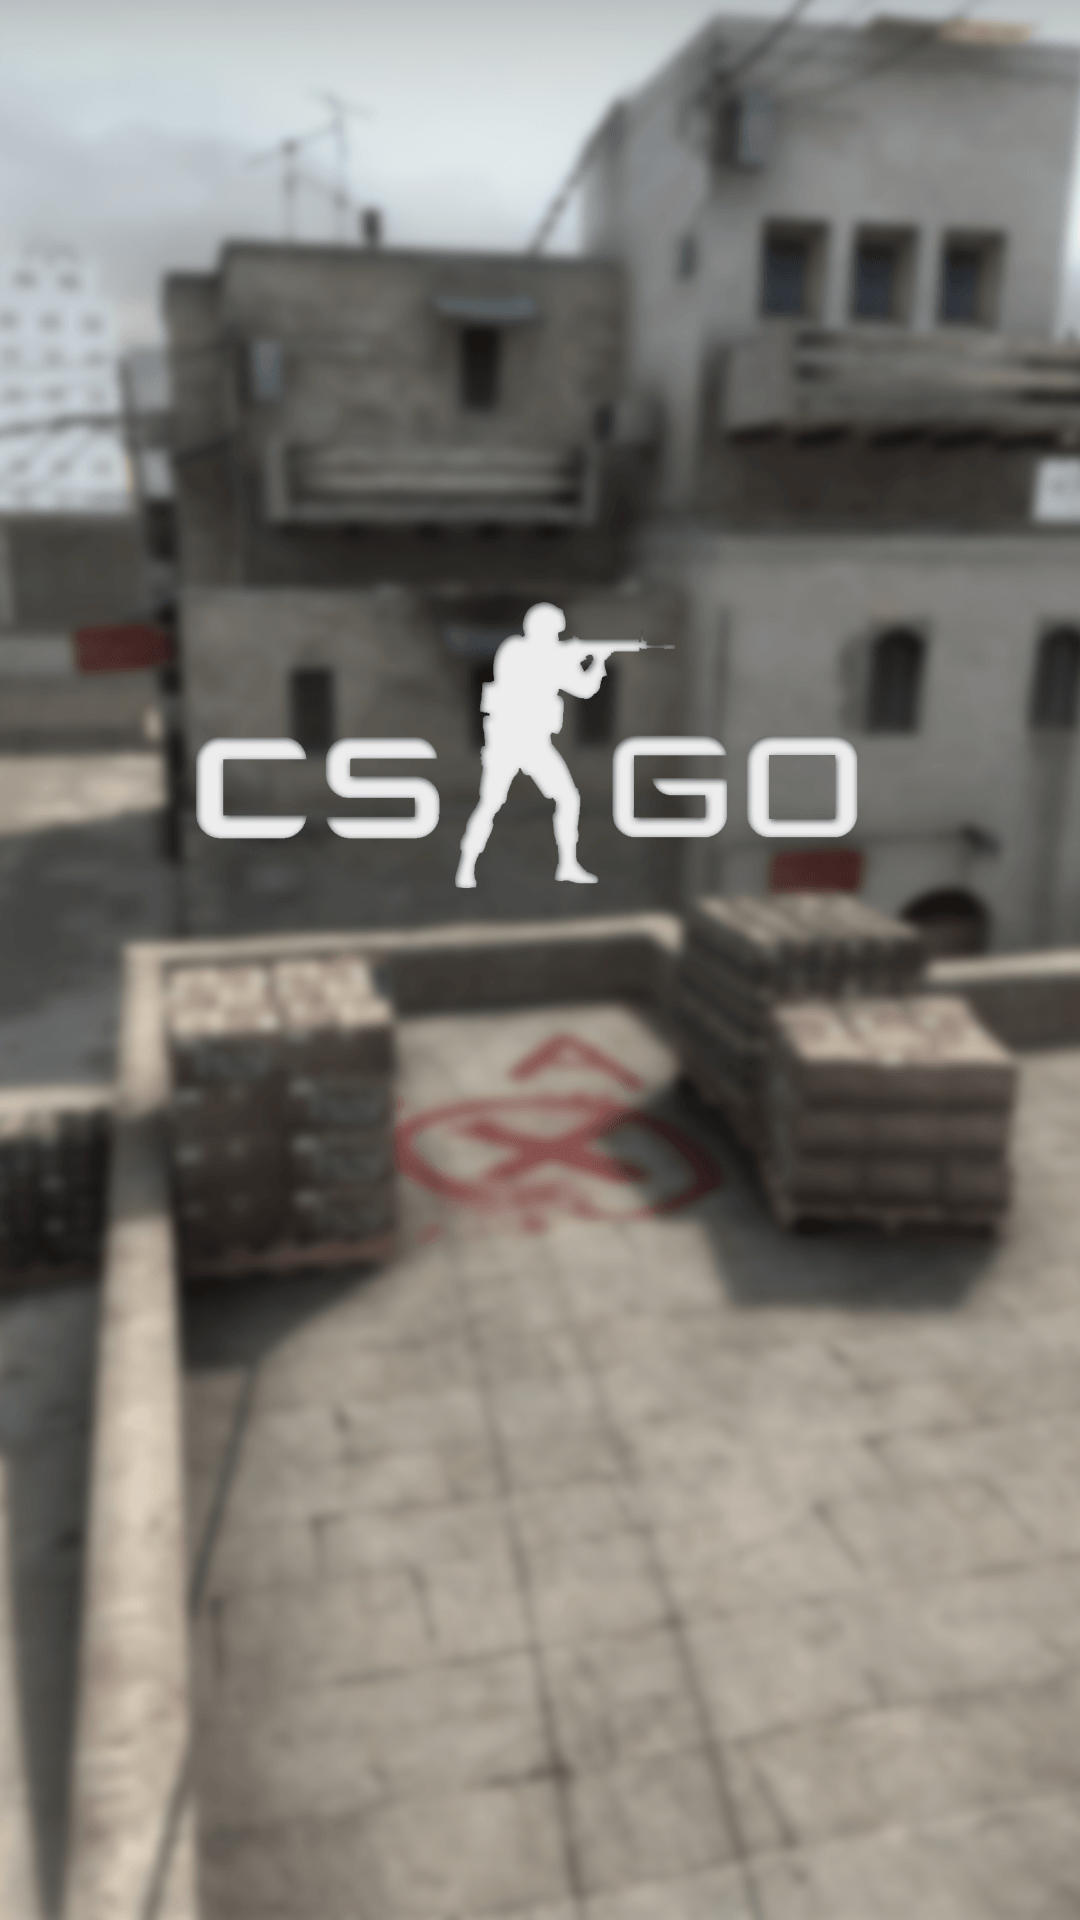 Couldn't find a god CSGO phone wallpaper so I made one. DL link